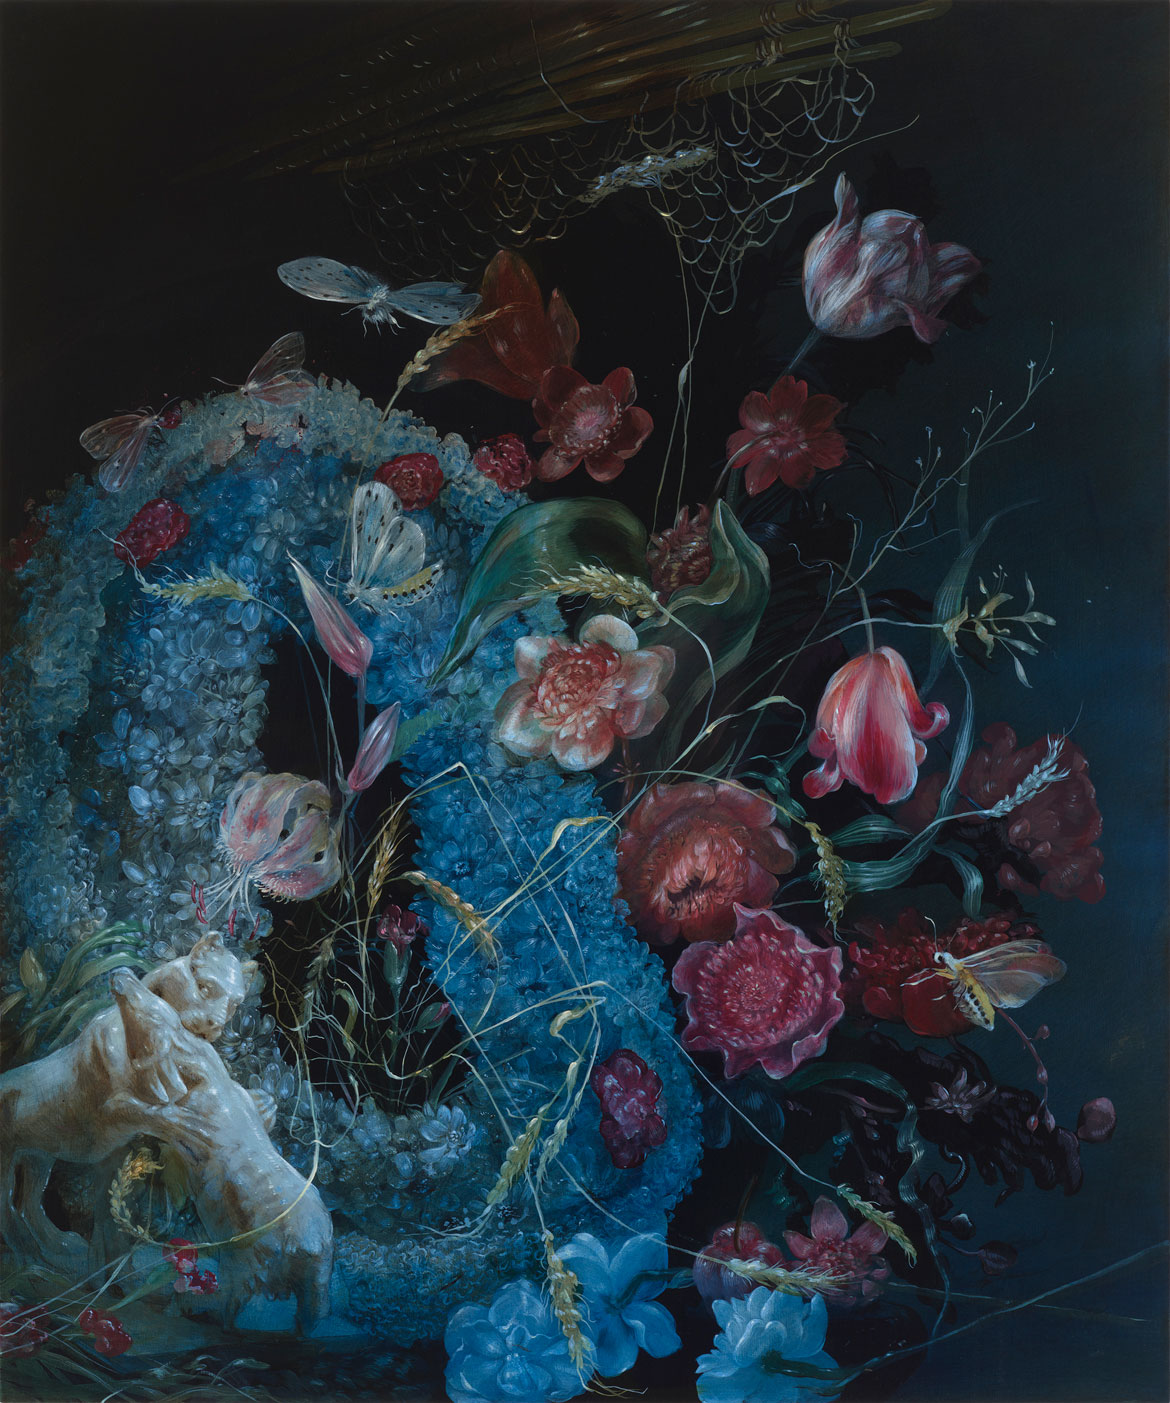 Nicole Duennebier, "Still Life with Wreath and Blue Sculpture," acrylic on panel.